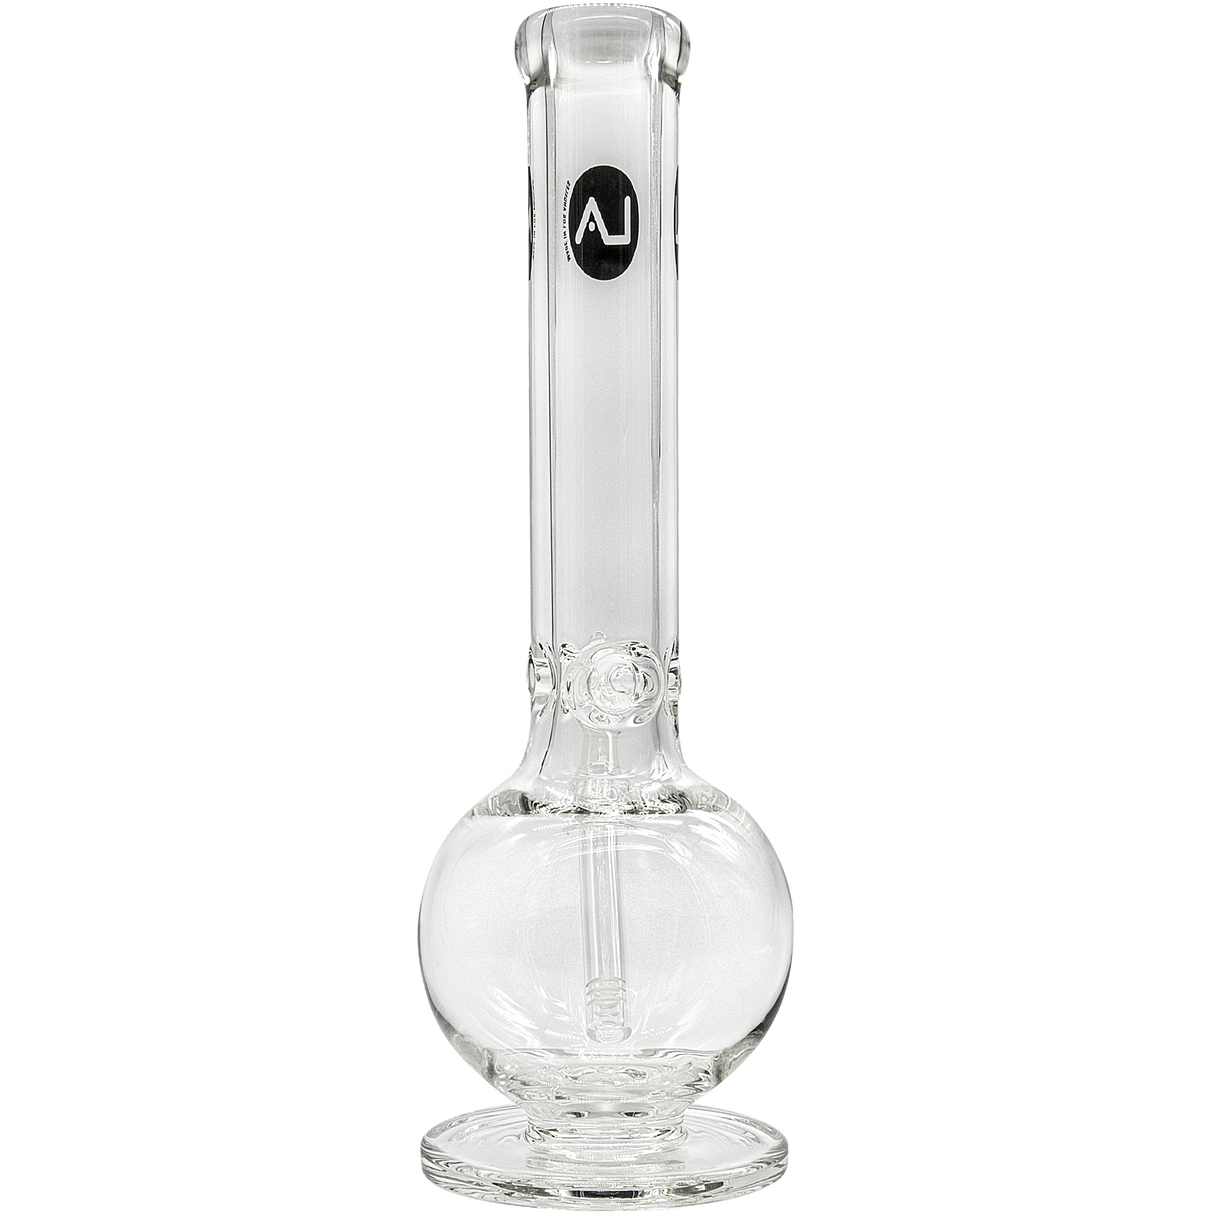 LA Pipes "Bazooka" 9mm Thick Glass Bong, 16"-18" Height, Front View on White Background